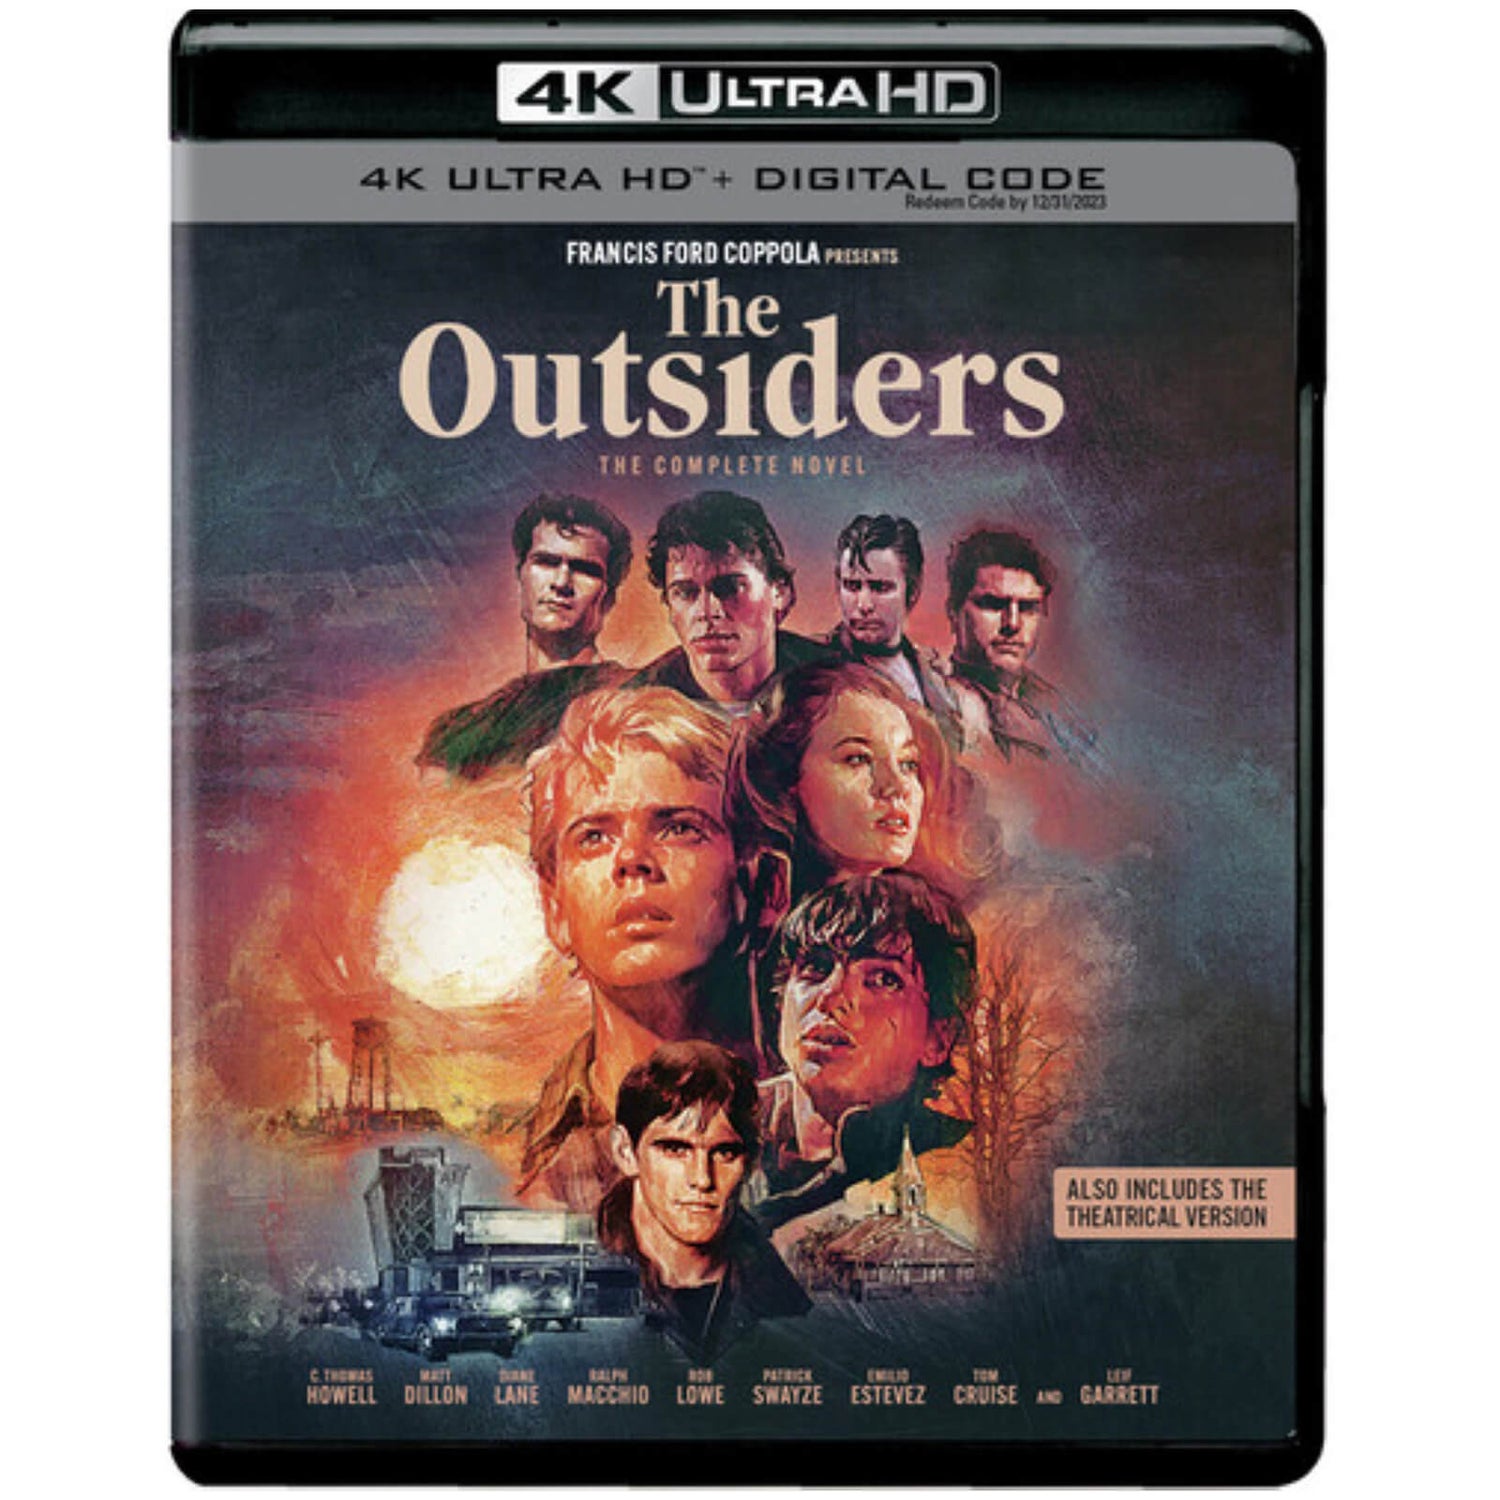 The Outsiders: The Complete Novel - 4K Ultra HD